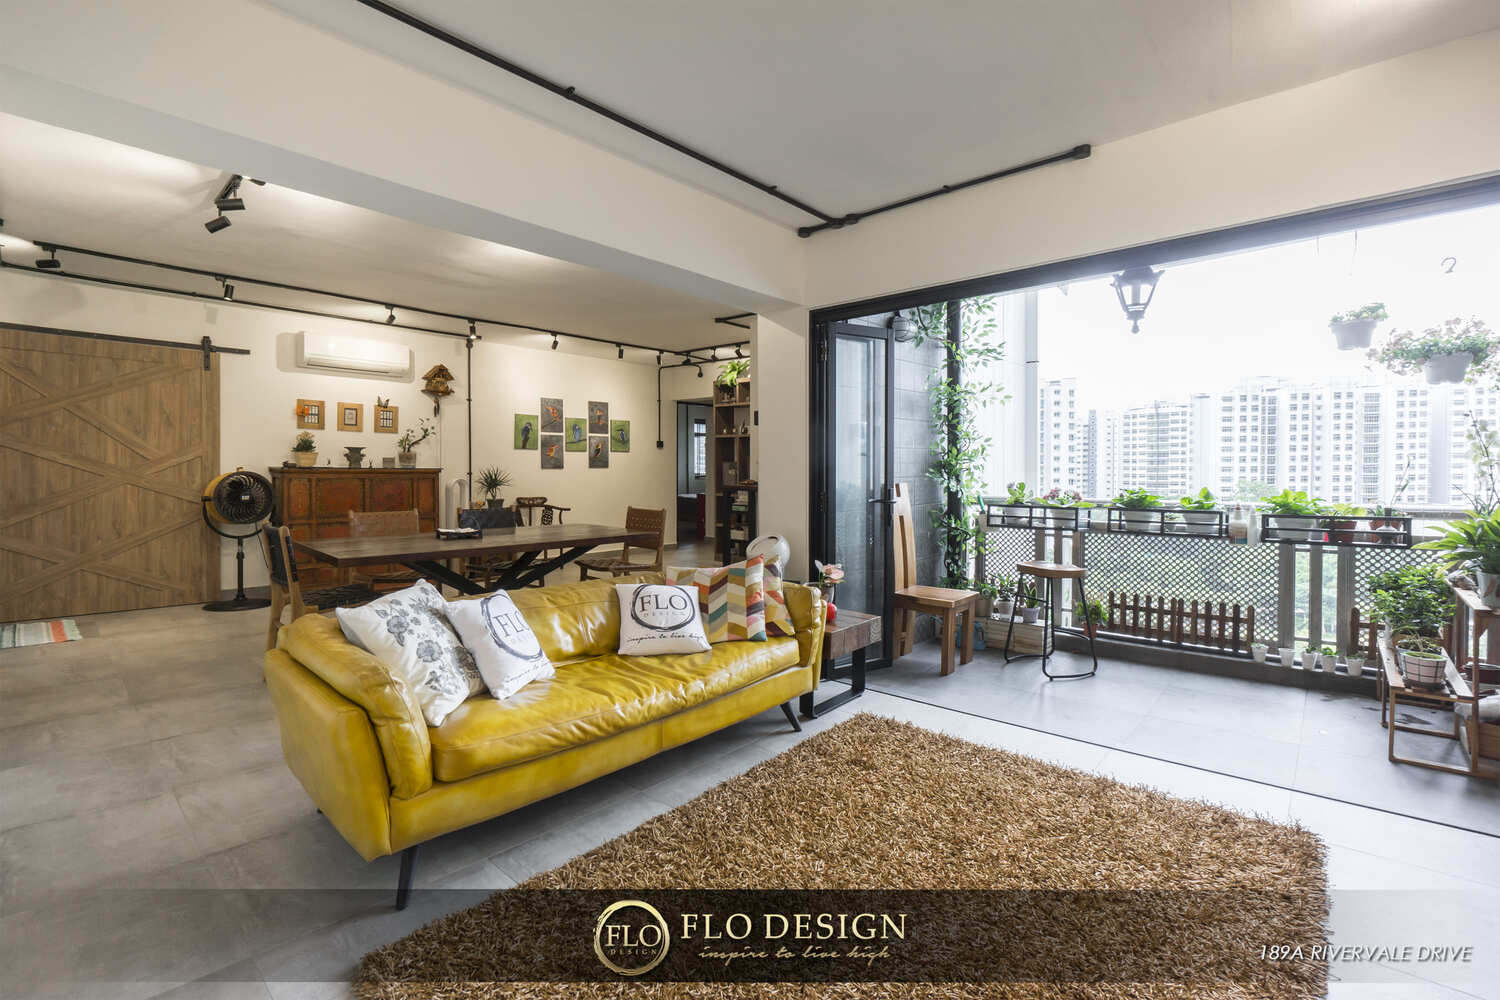 189 Rivervale Drive - 1410sqft by Flo Design Pte. Ltd. Unit is HDB and follows a Eclectic Style style.